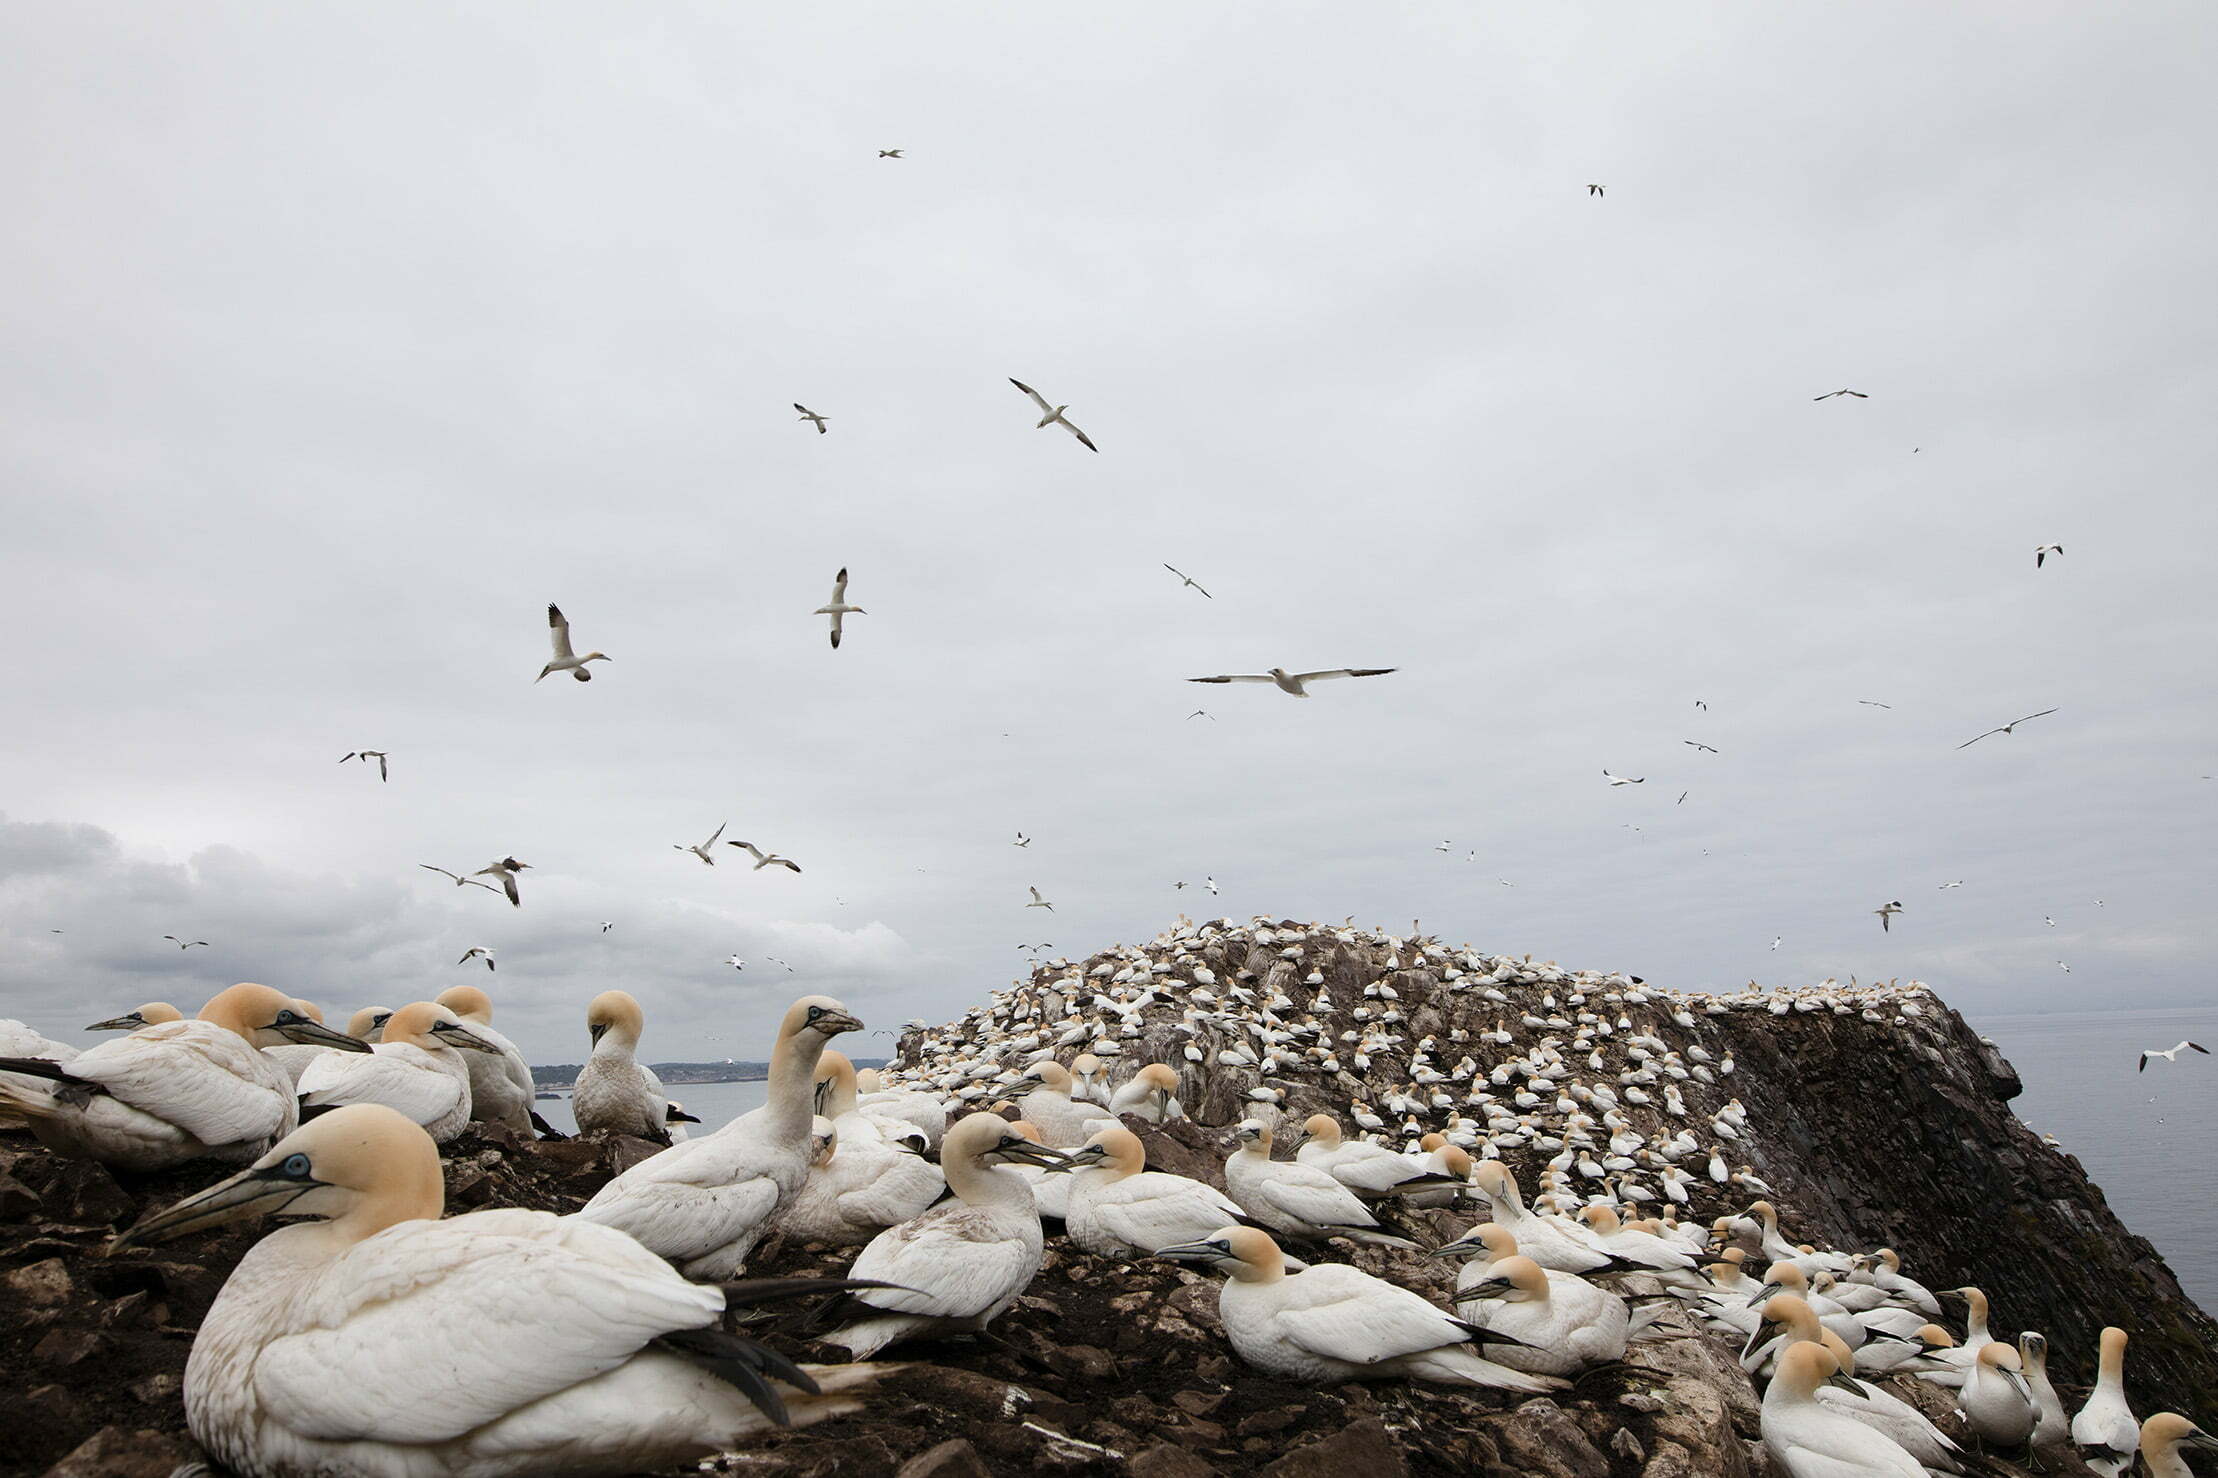 Northern gannets take flight over colony on Bass Rock.